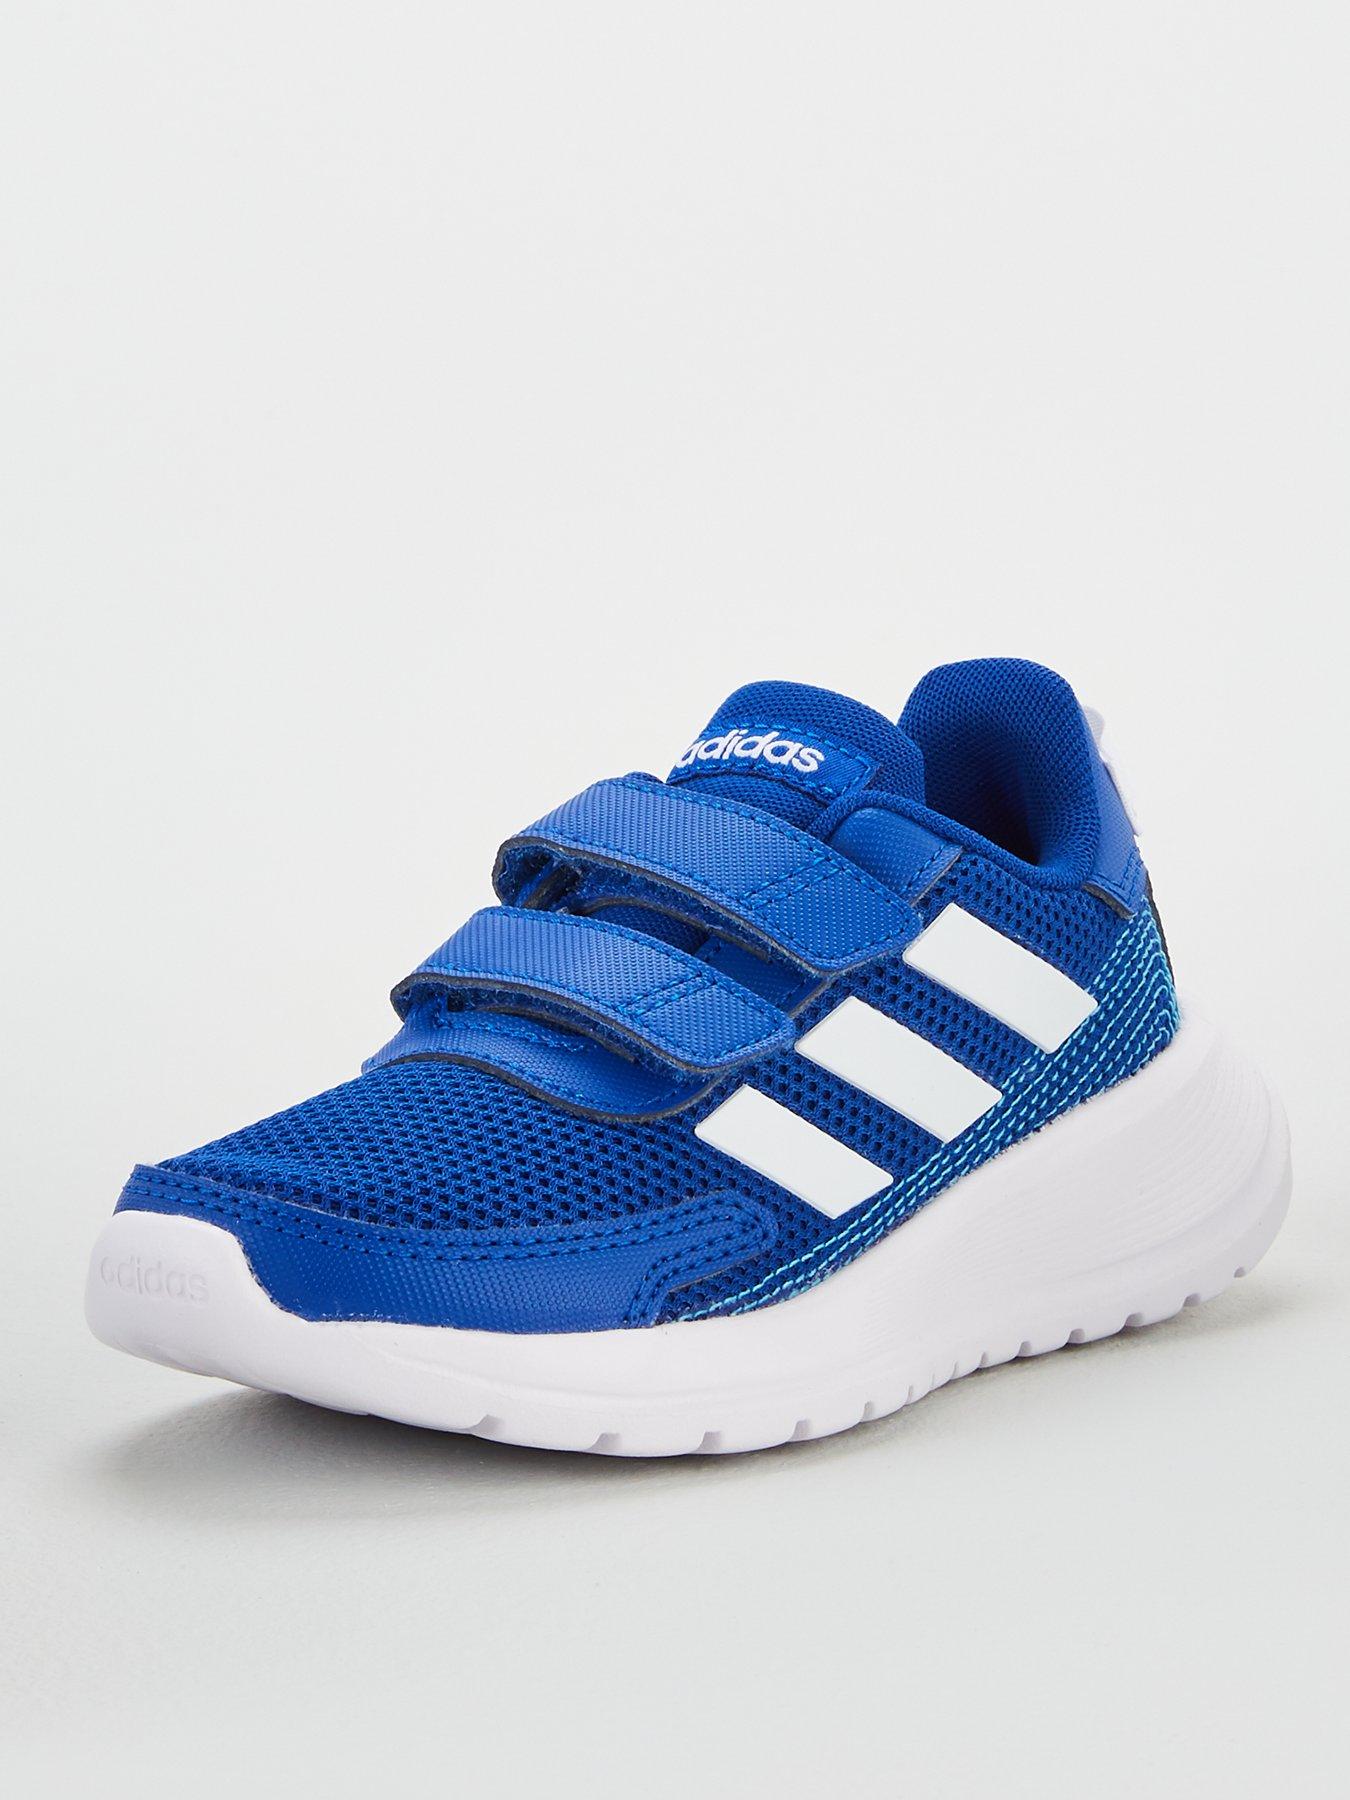 blue and white adidas trainers